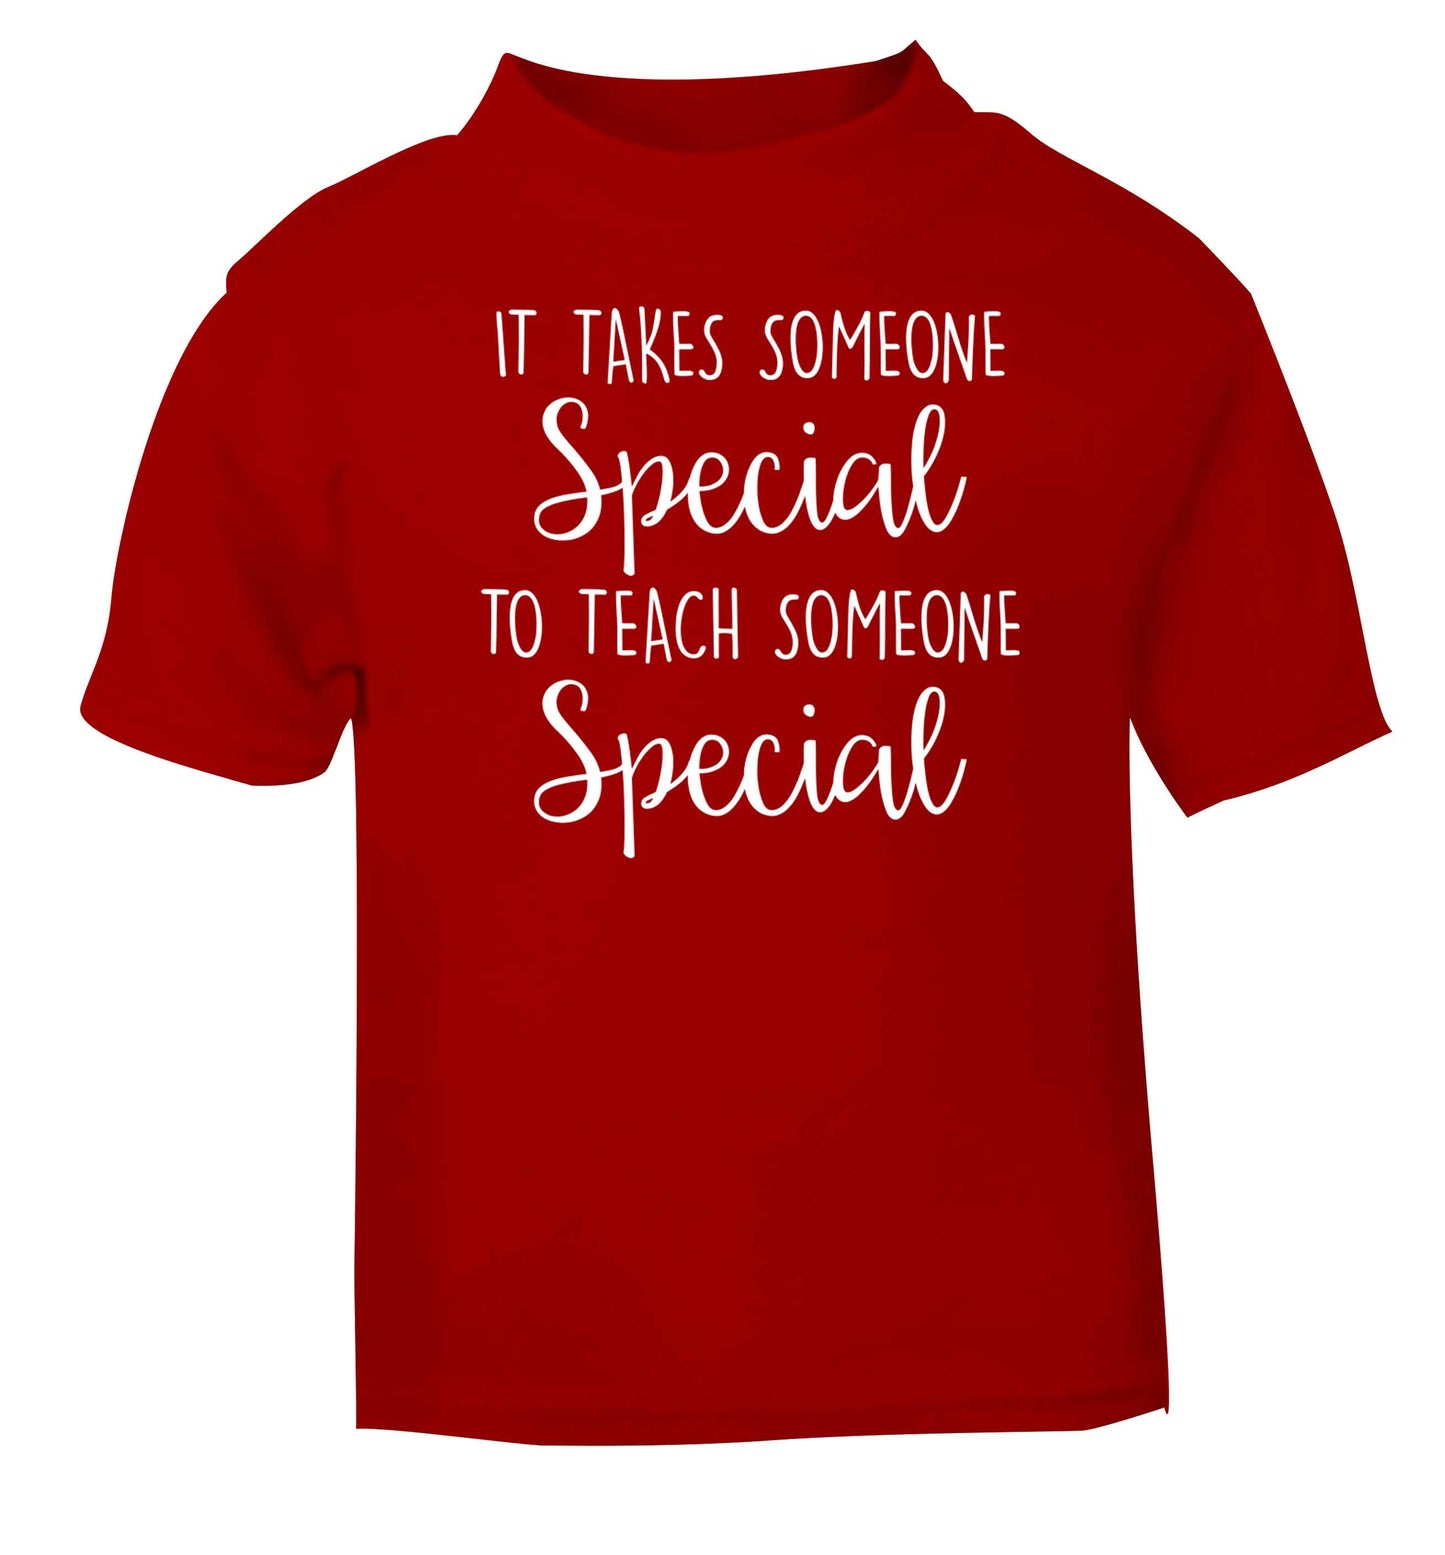 It takes someone special to teach someone special red baby toddler Tshirt 2 Years